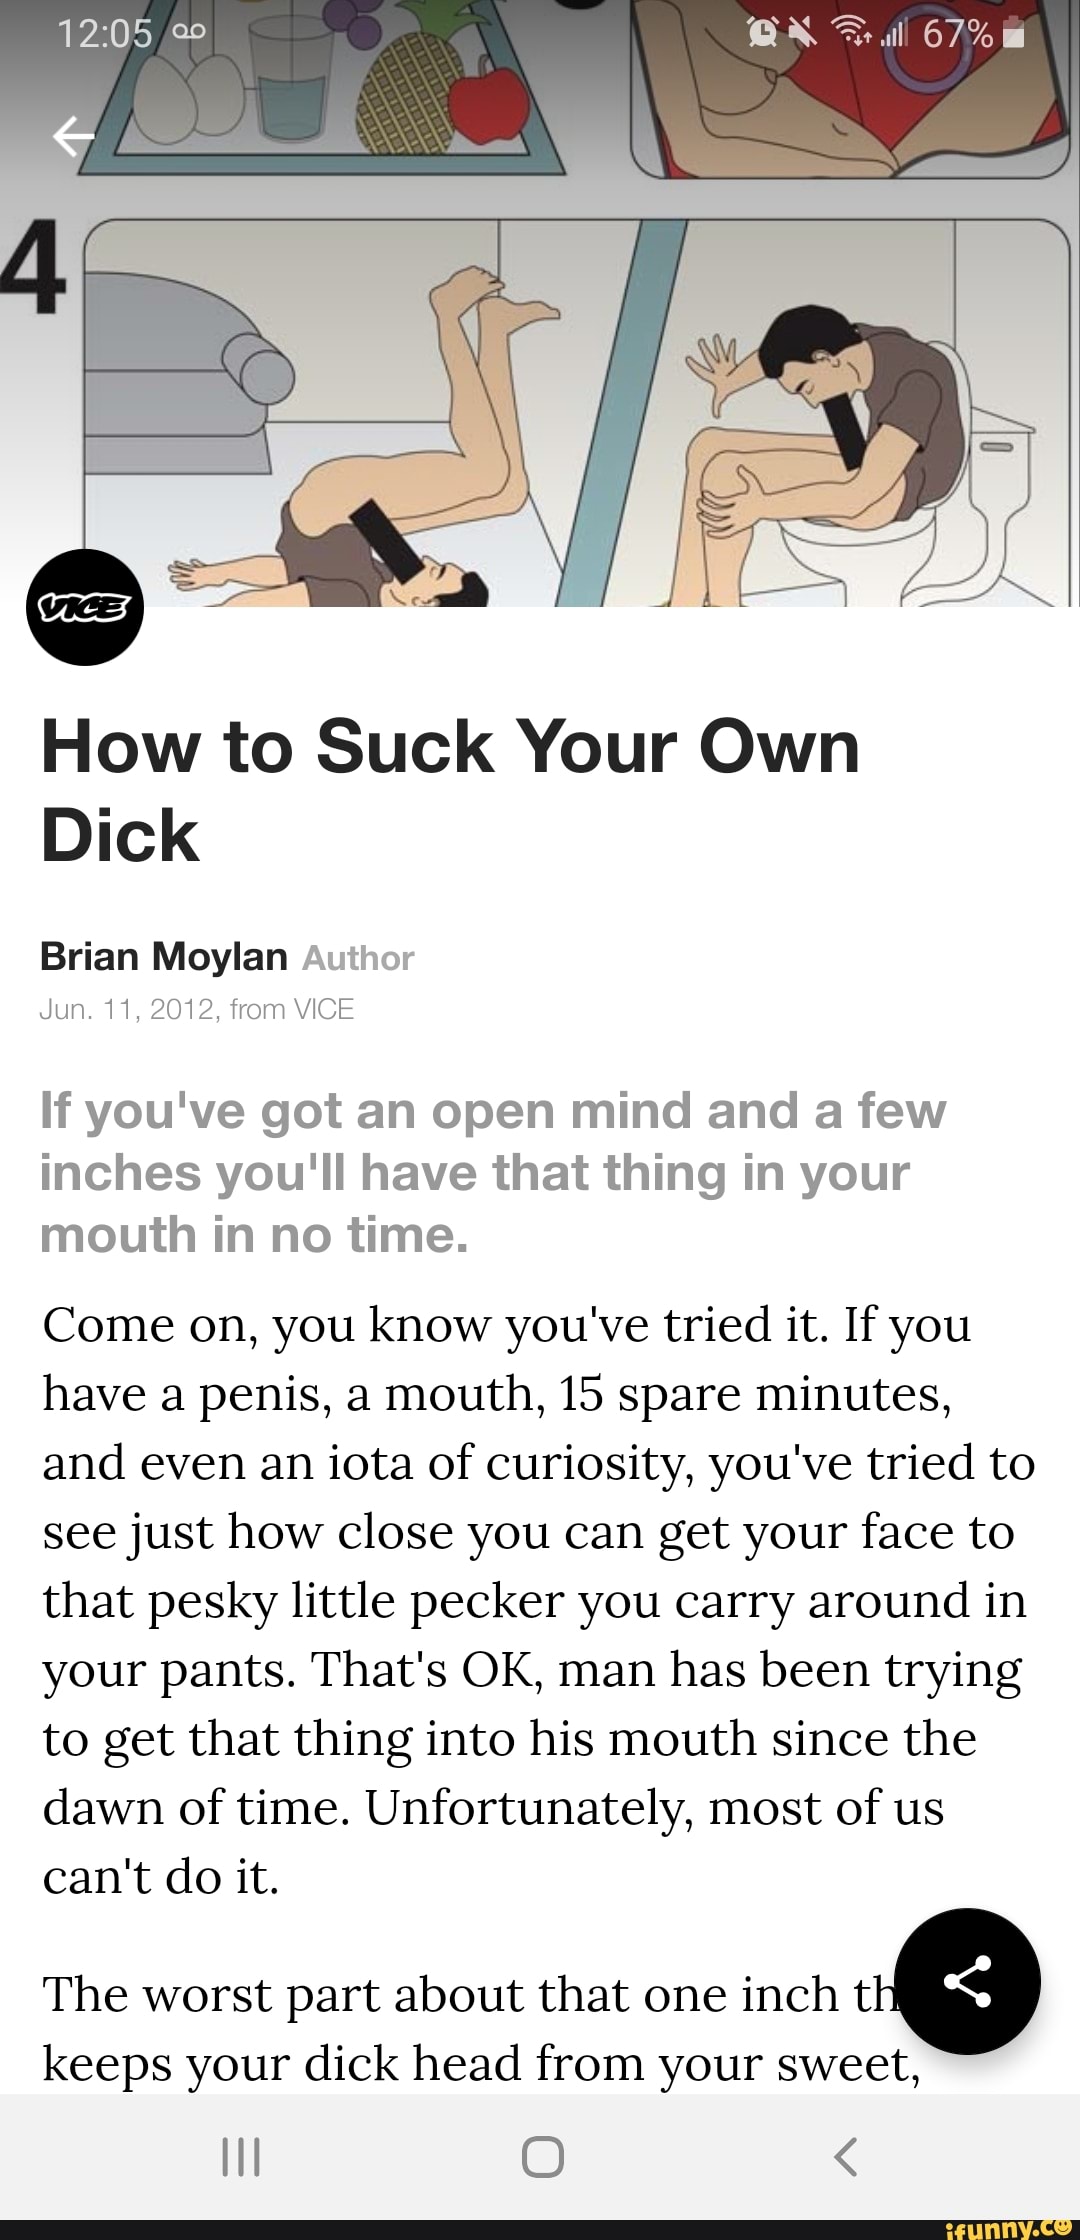 How to suck your own tiny dick